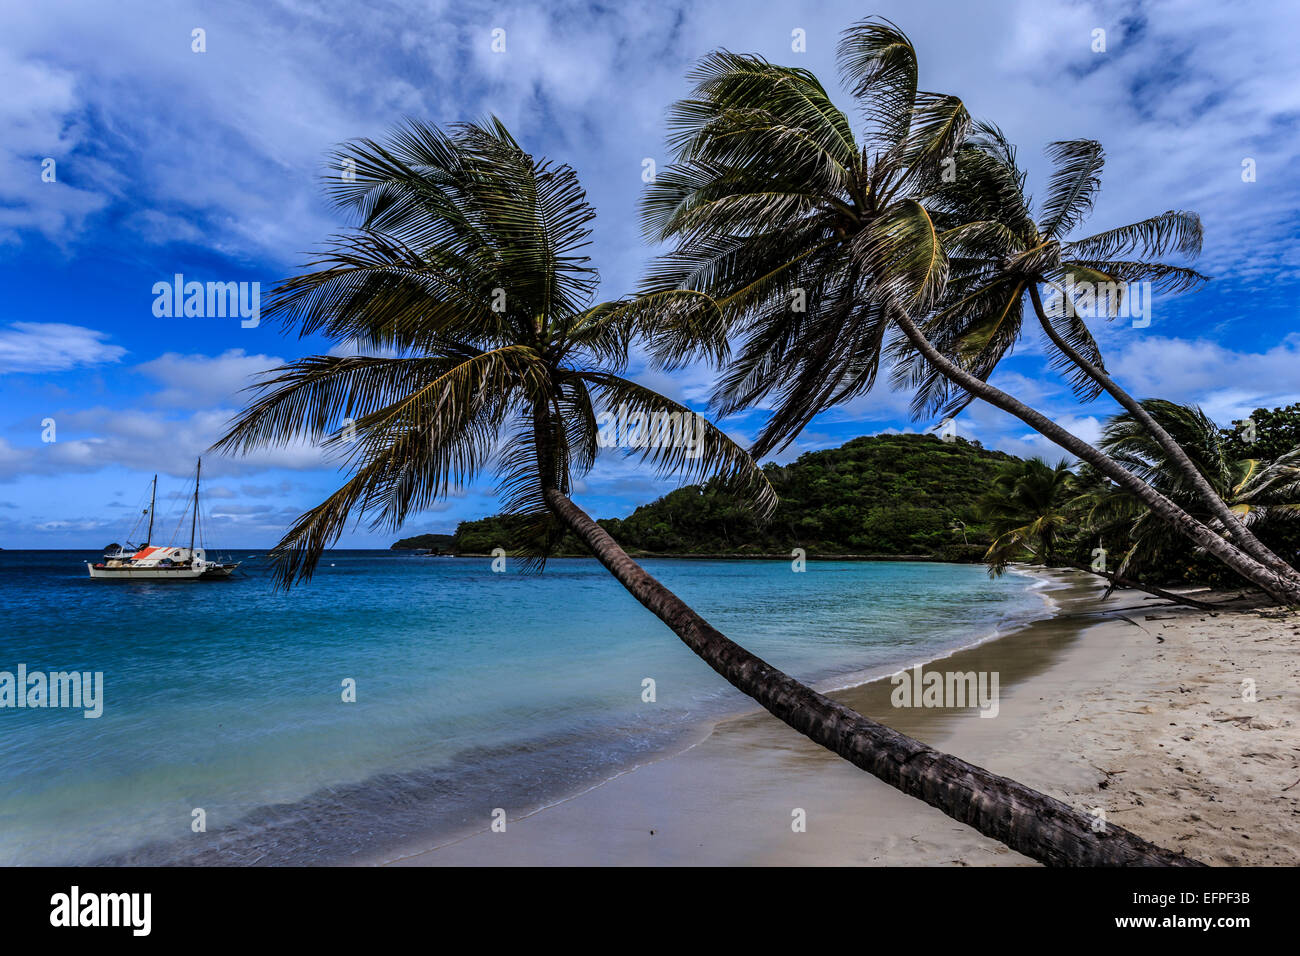 Palm trees and deserted beach, Saltwhistle Bay, Mayreau, Grenadines of St. Vincent, Windward Islands, West Indies, Caribbean Stock Photo